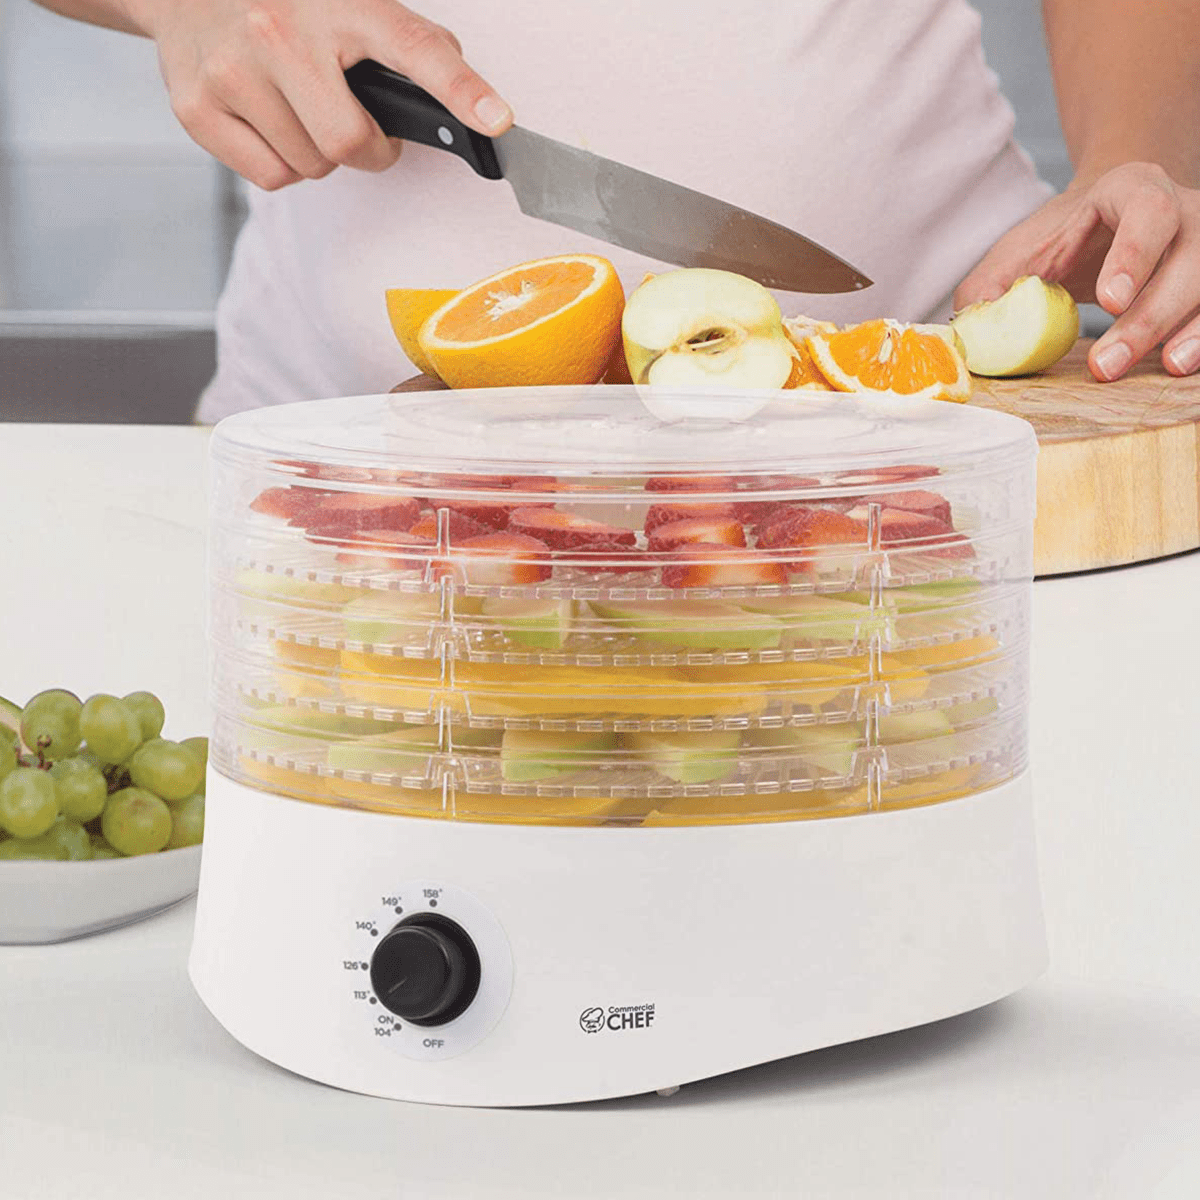 https://www.tasteofhome.com/wp-content/uploads/2022/03/commercial-chef-food-dehydrator-via-amazon.com-ecomm.png?fit=700%2C700